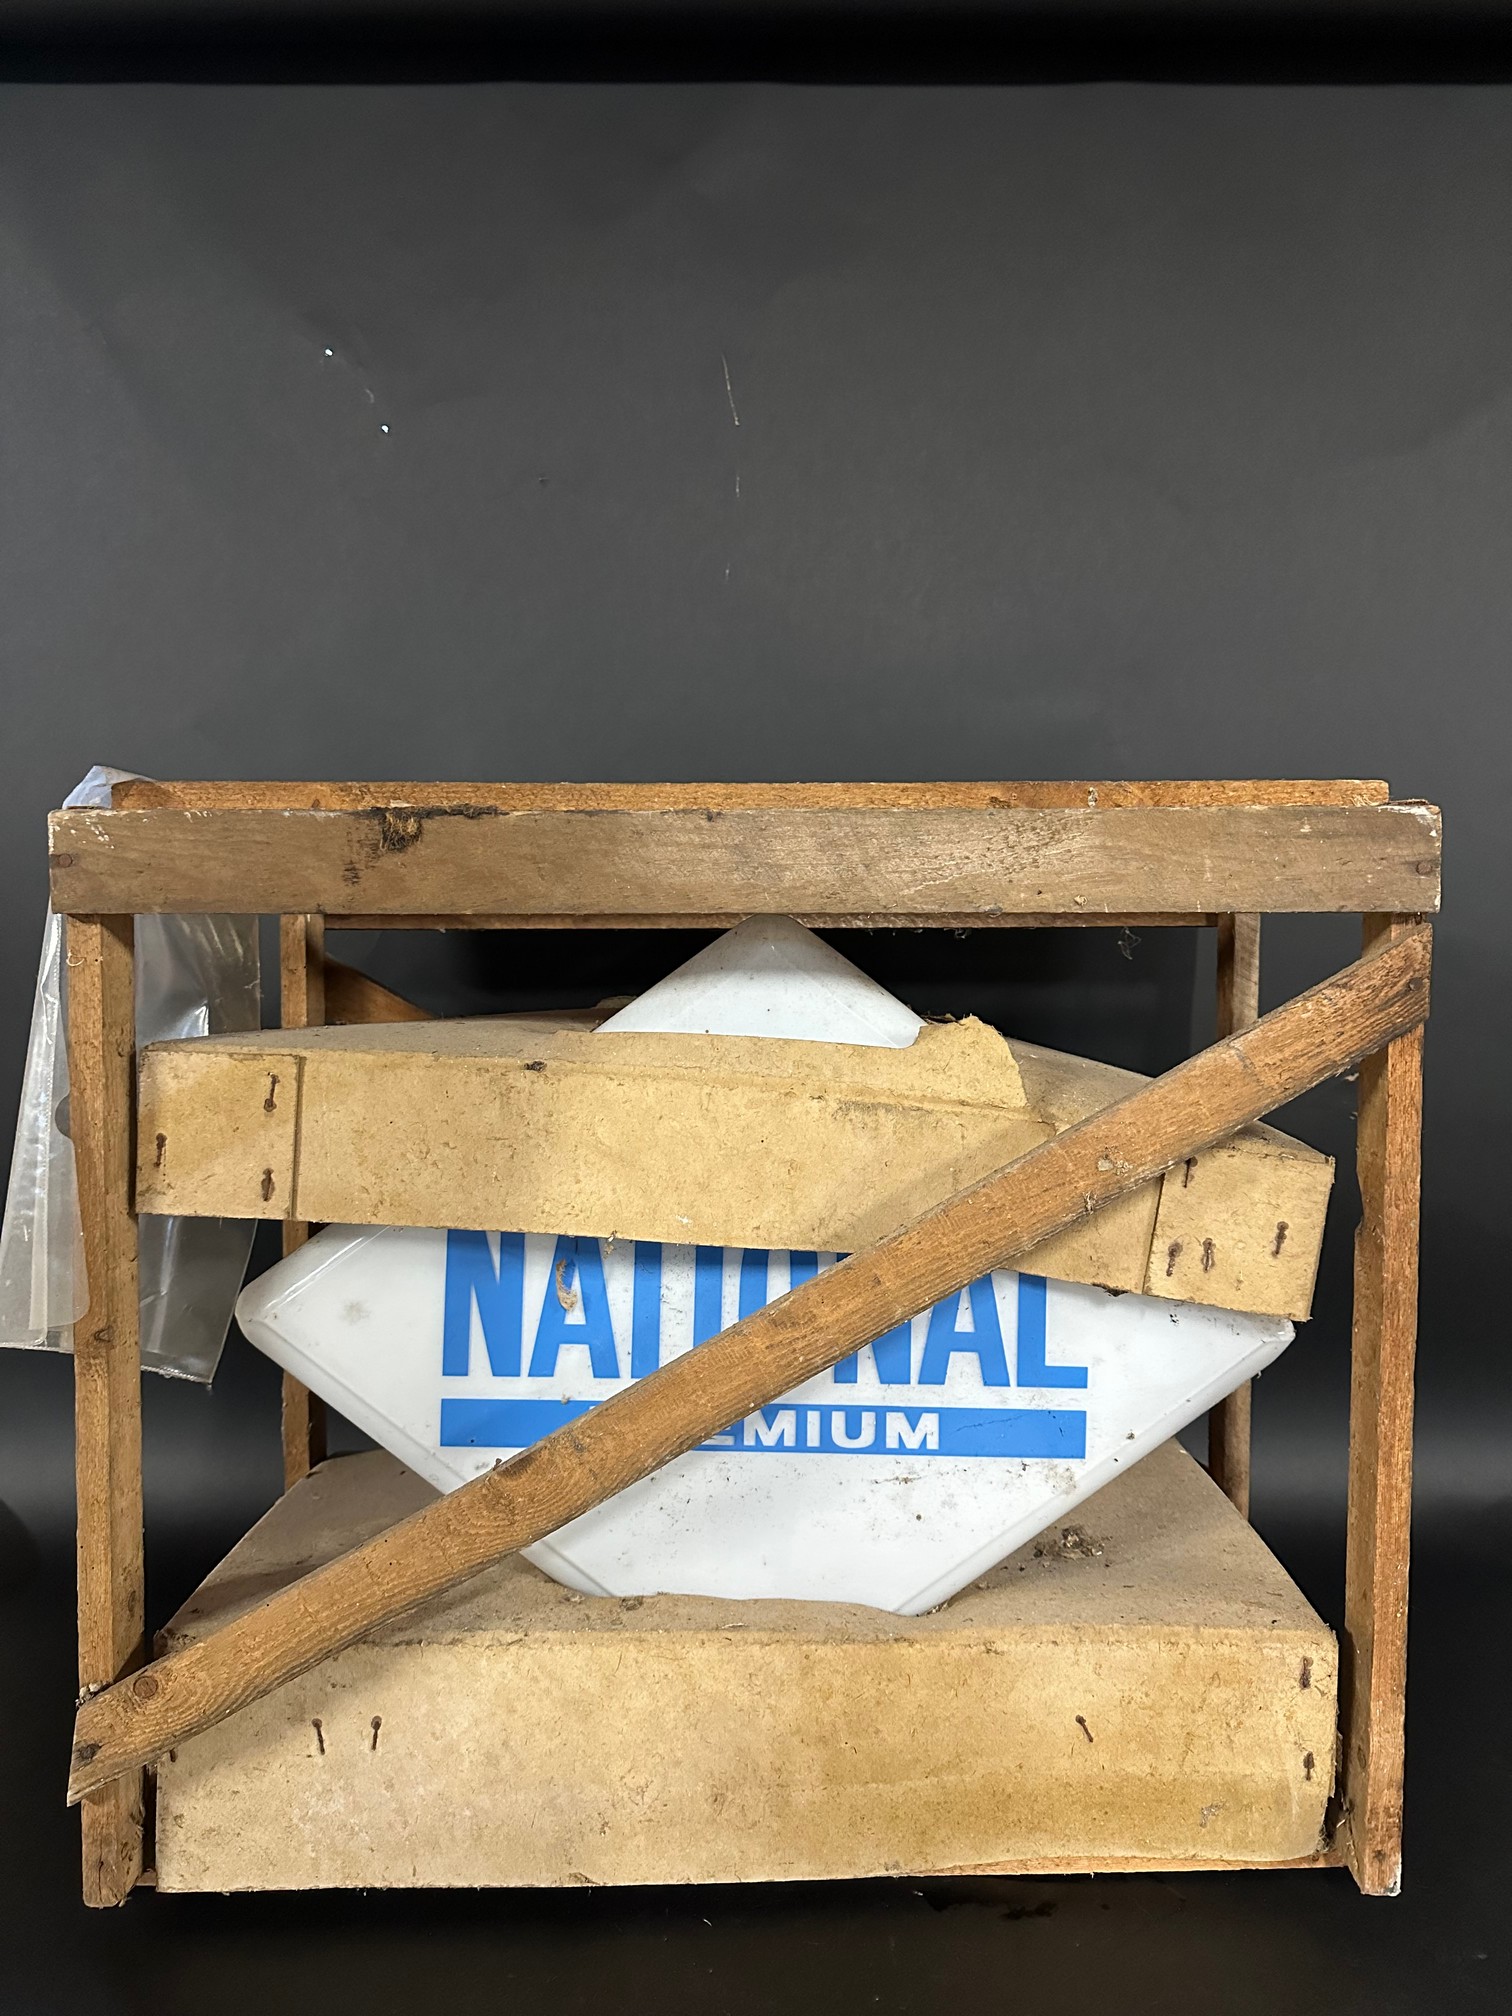 A National 'Premium' lozenge shaped glass petrol pump globe in original packing crate of issue. - Image 6 of 7